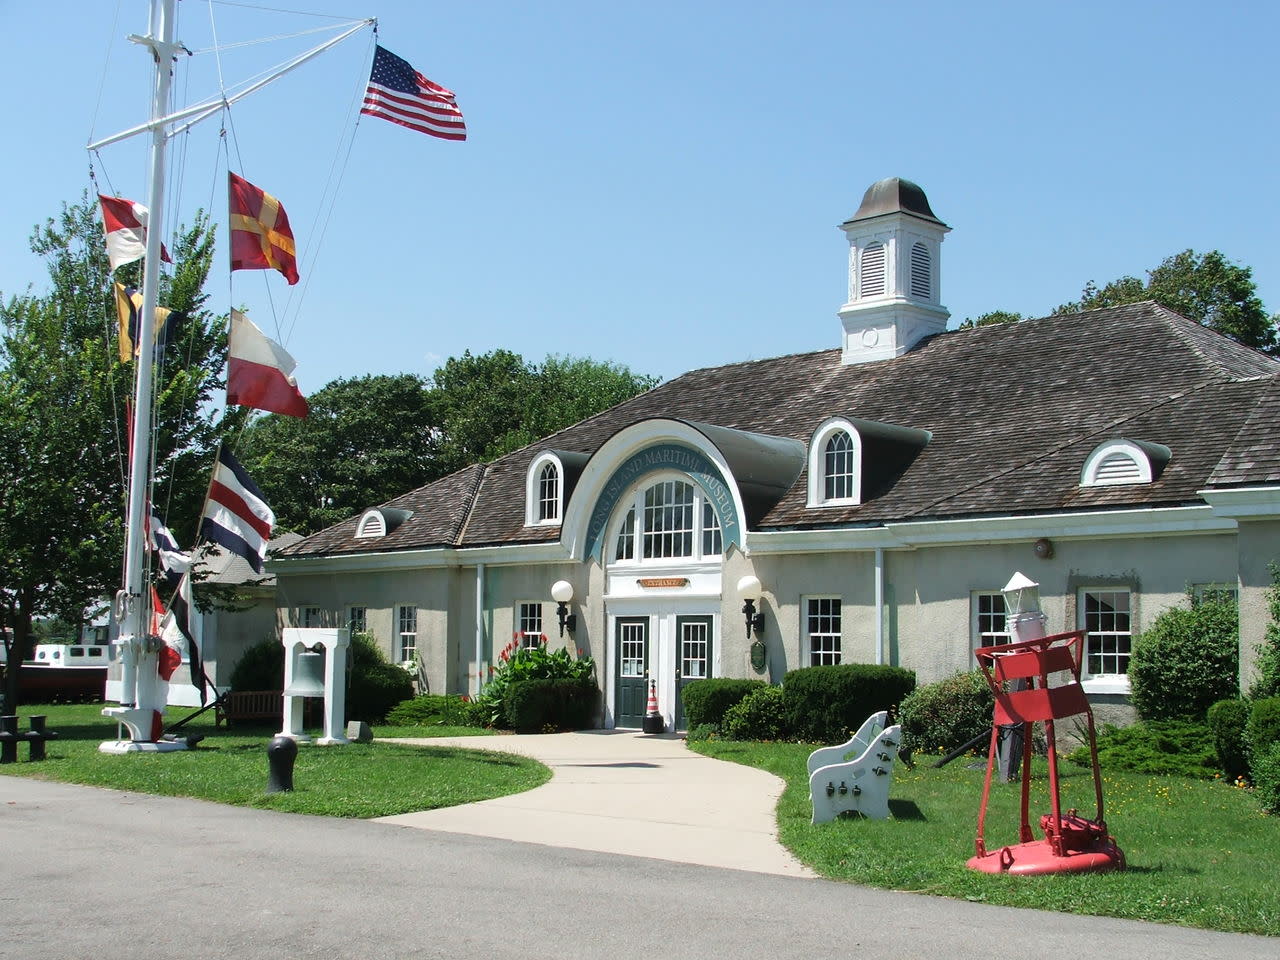 The Long Island Museum